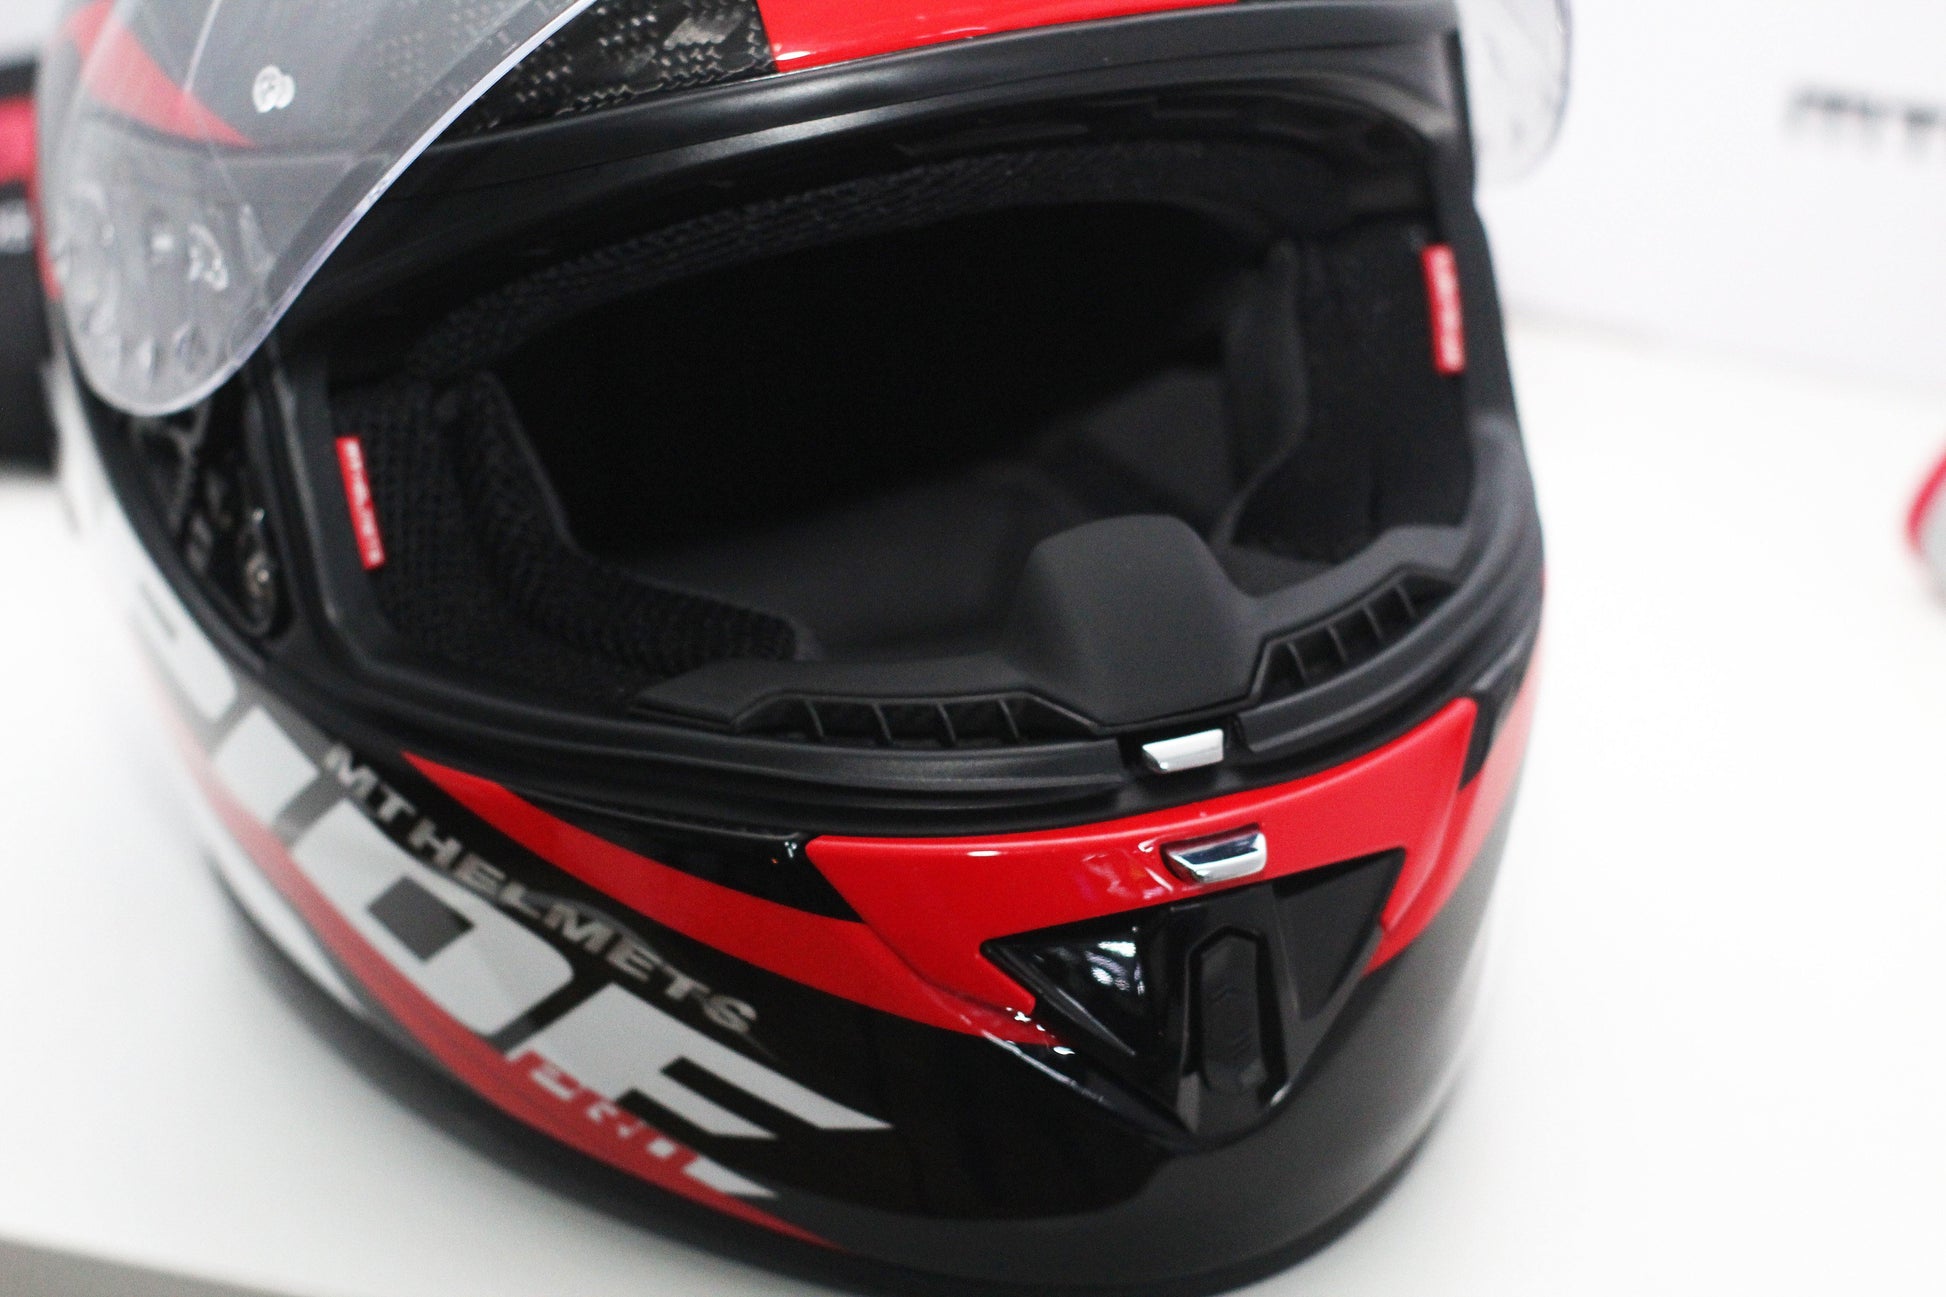 MT Rapide Pro Carbon (Gloss Red) - Durian Bikers